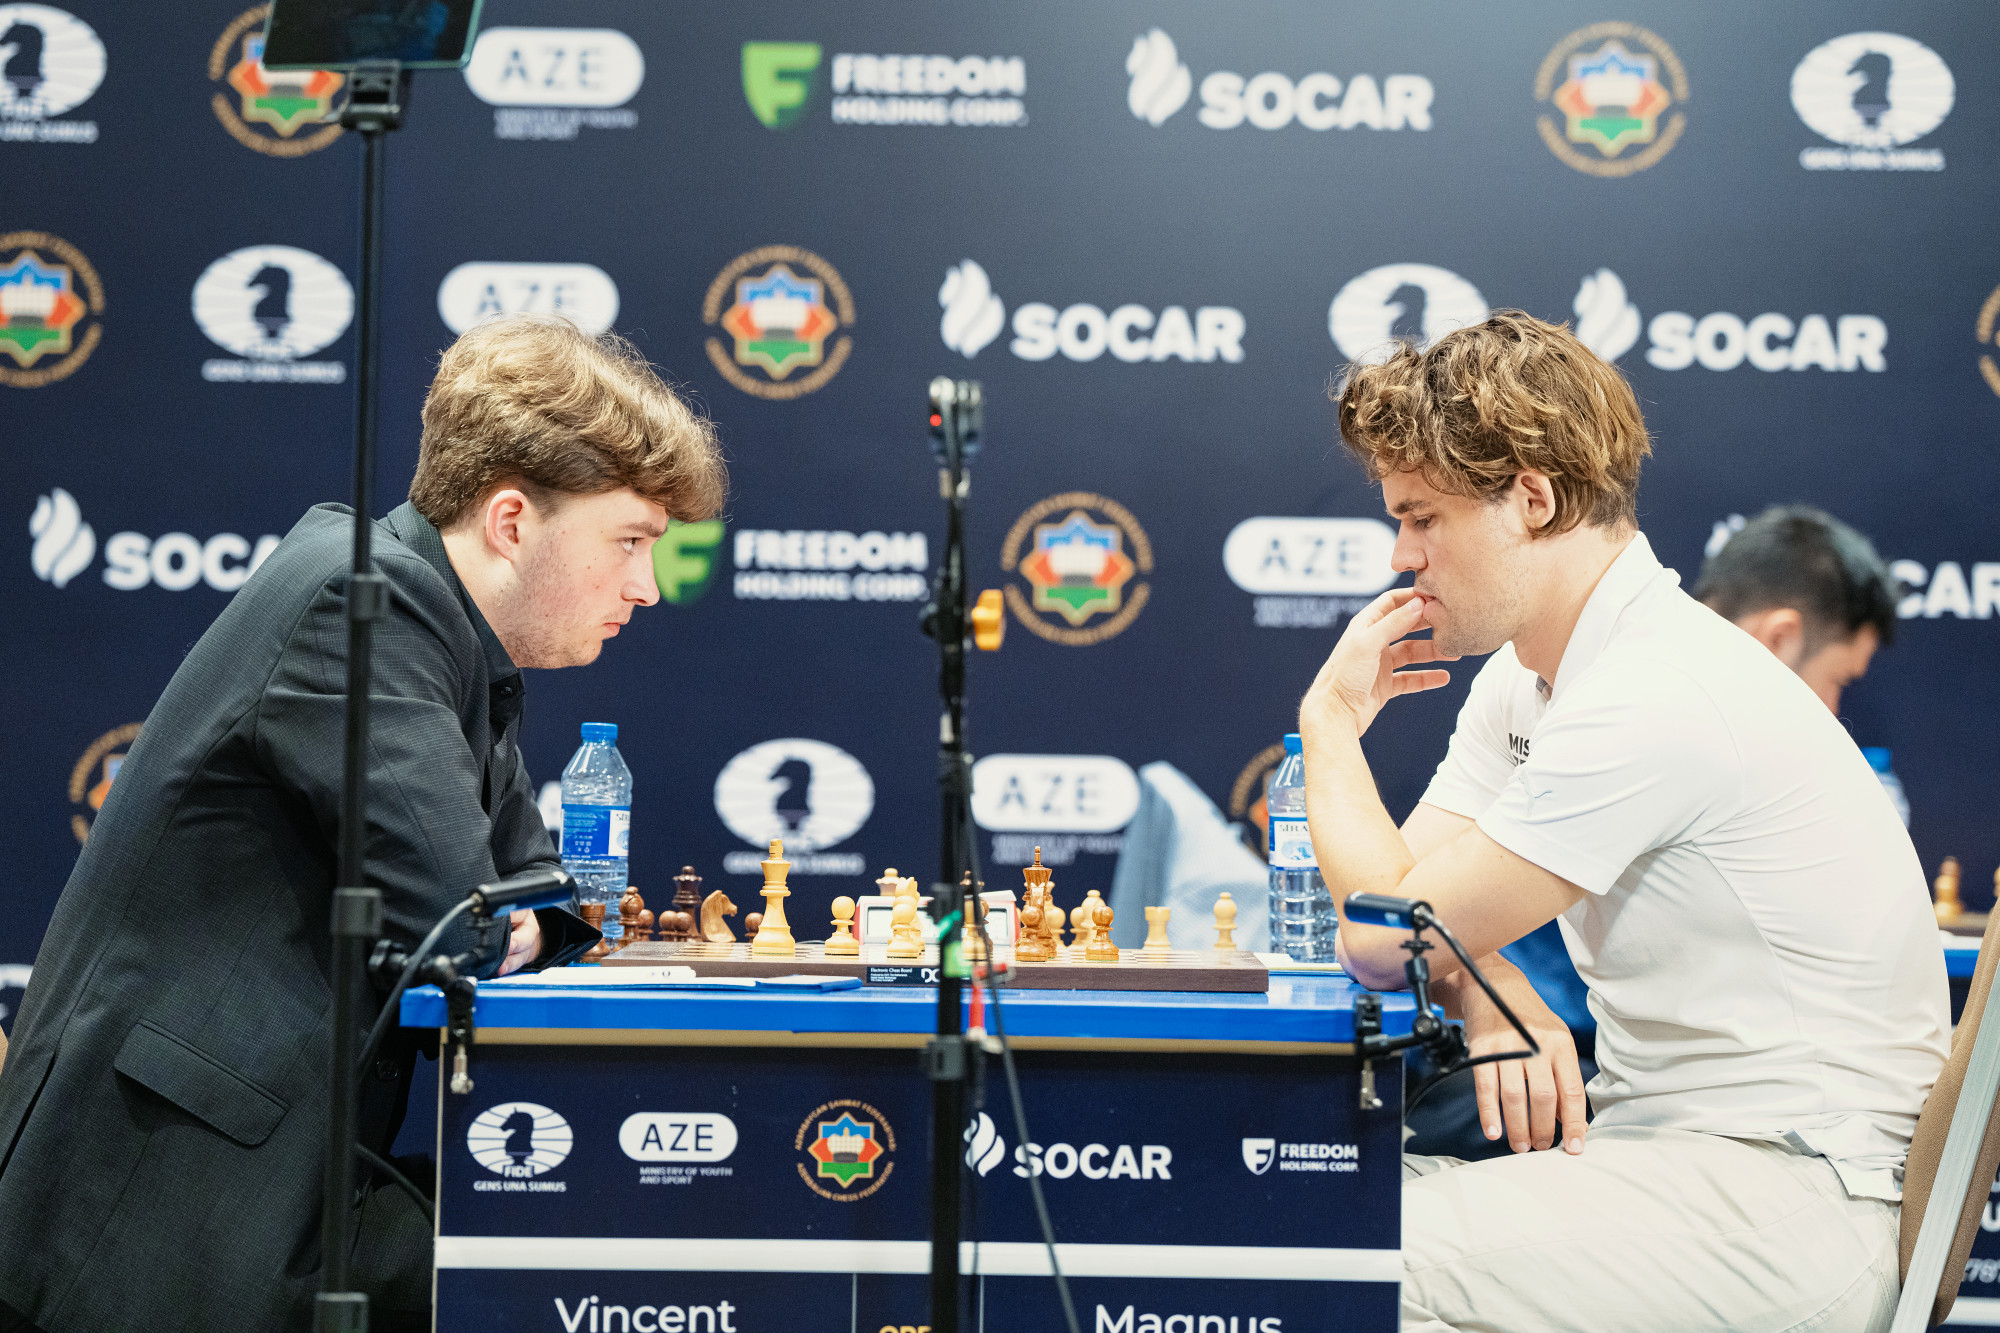 FIDE World Cup Round 4 Game 1: Magnus Carlsen loses to 18-year-old